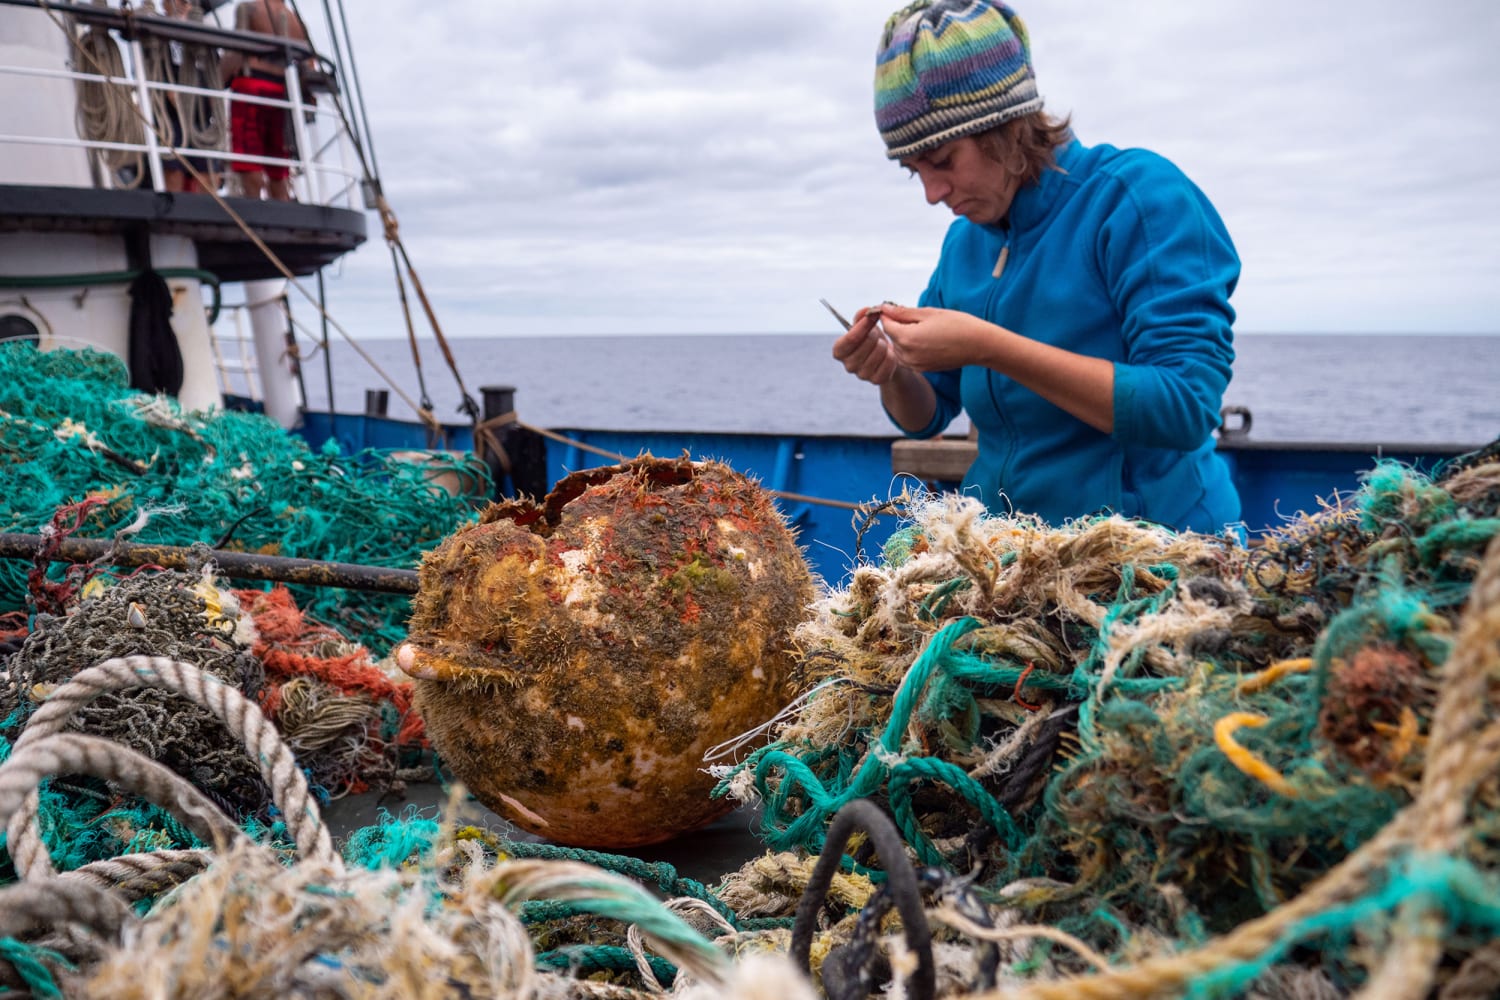 An ‘island has emerged’: Coastal species discovered thriving on Great Pacific Garbage Patch, scientists say